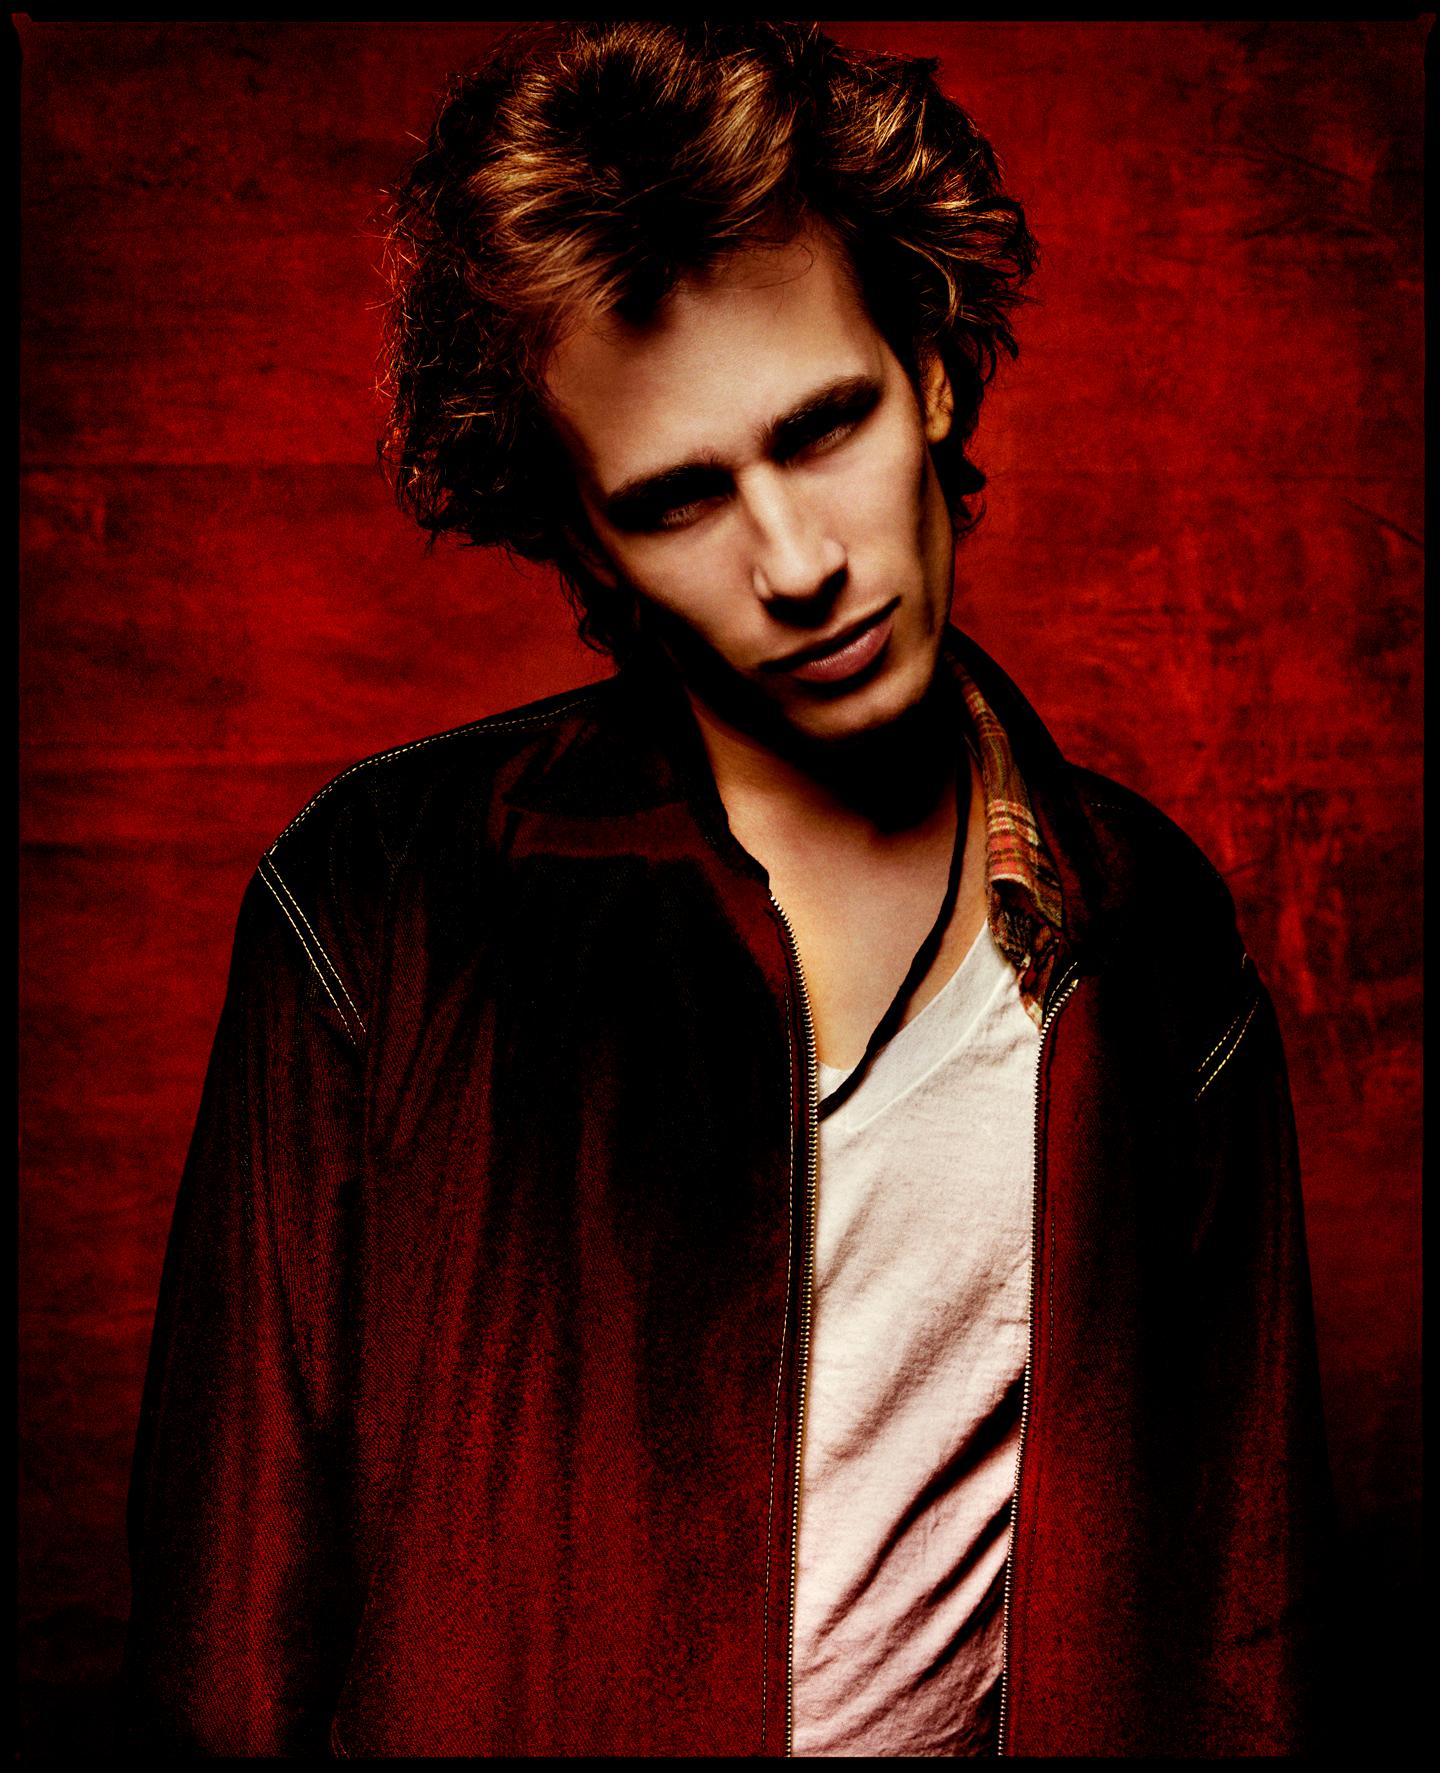 Jeff Buckley 

1994

by Kevin Westenberg
Signed Limited Edition

Kevin Westenberg is famed for his creation of provocative and electrifying images of world-class musicians, artists and movie stars for over 25 years.

His technique of lighting,